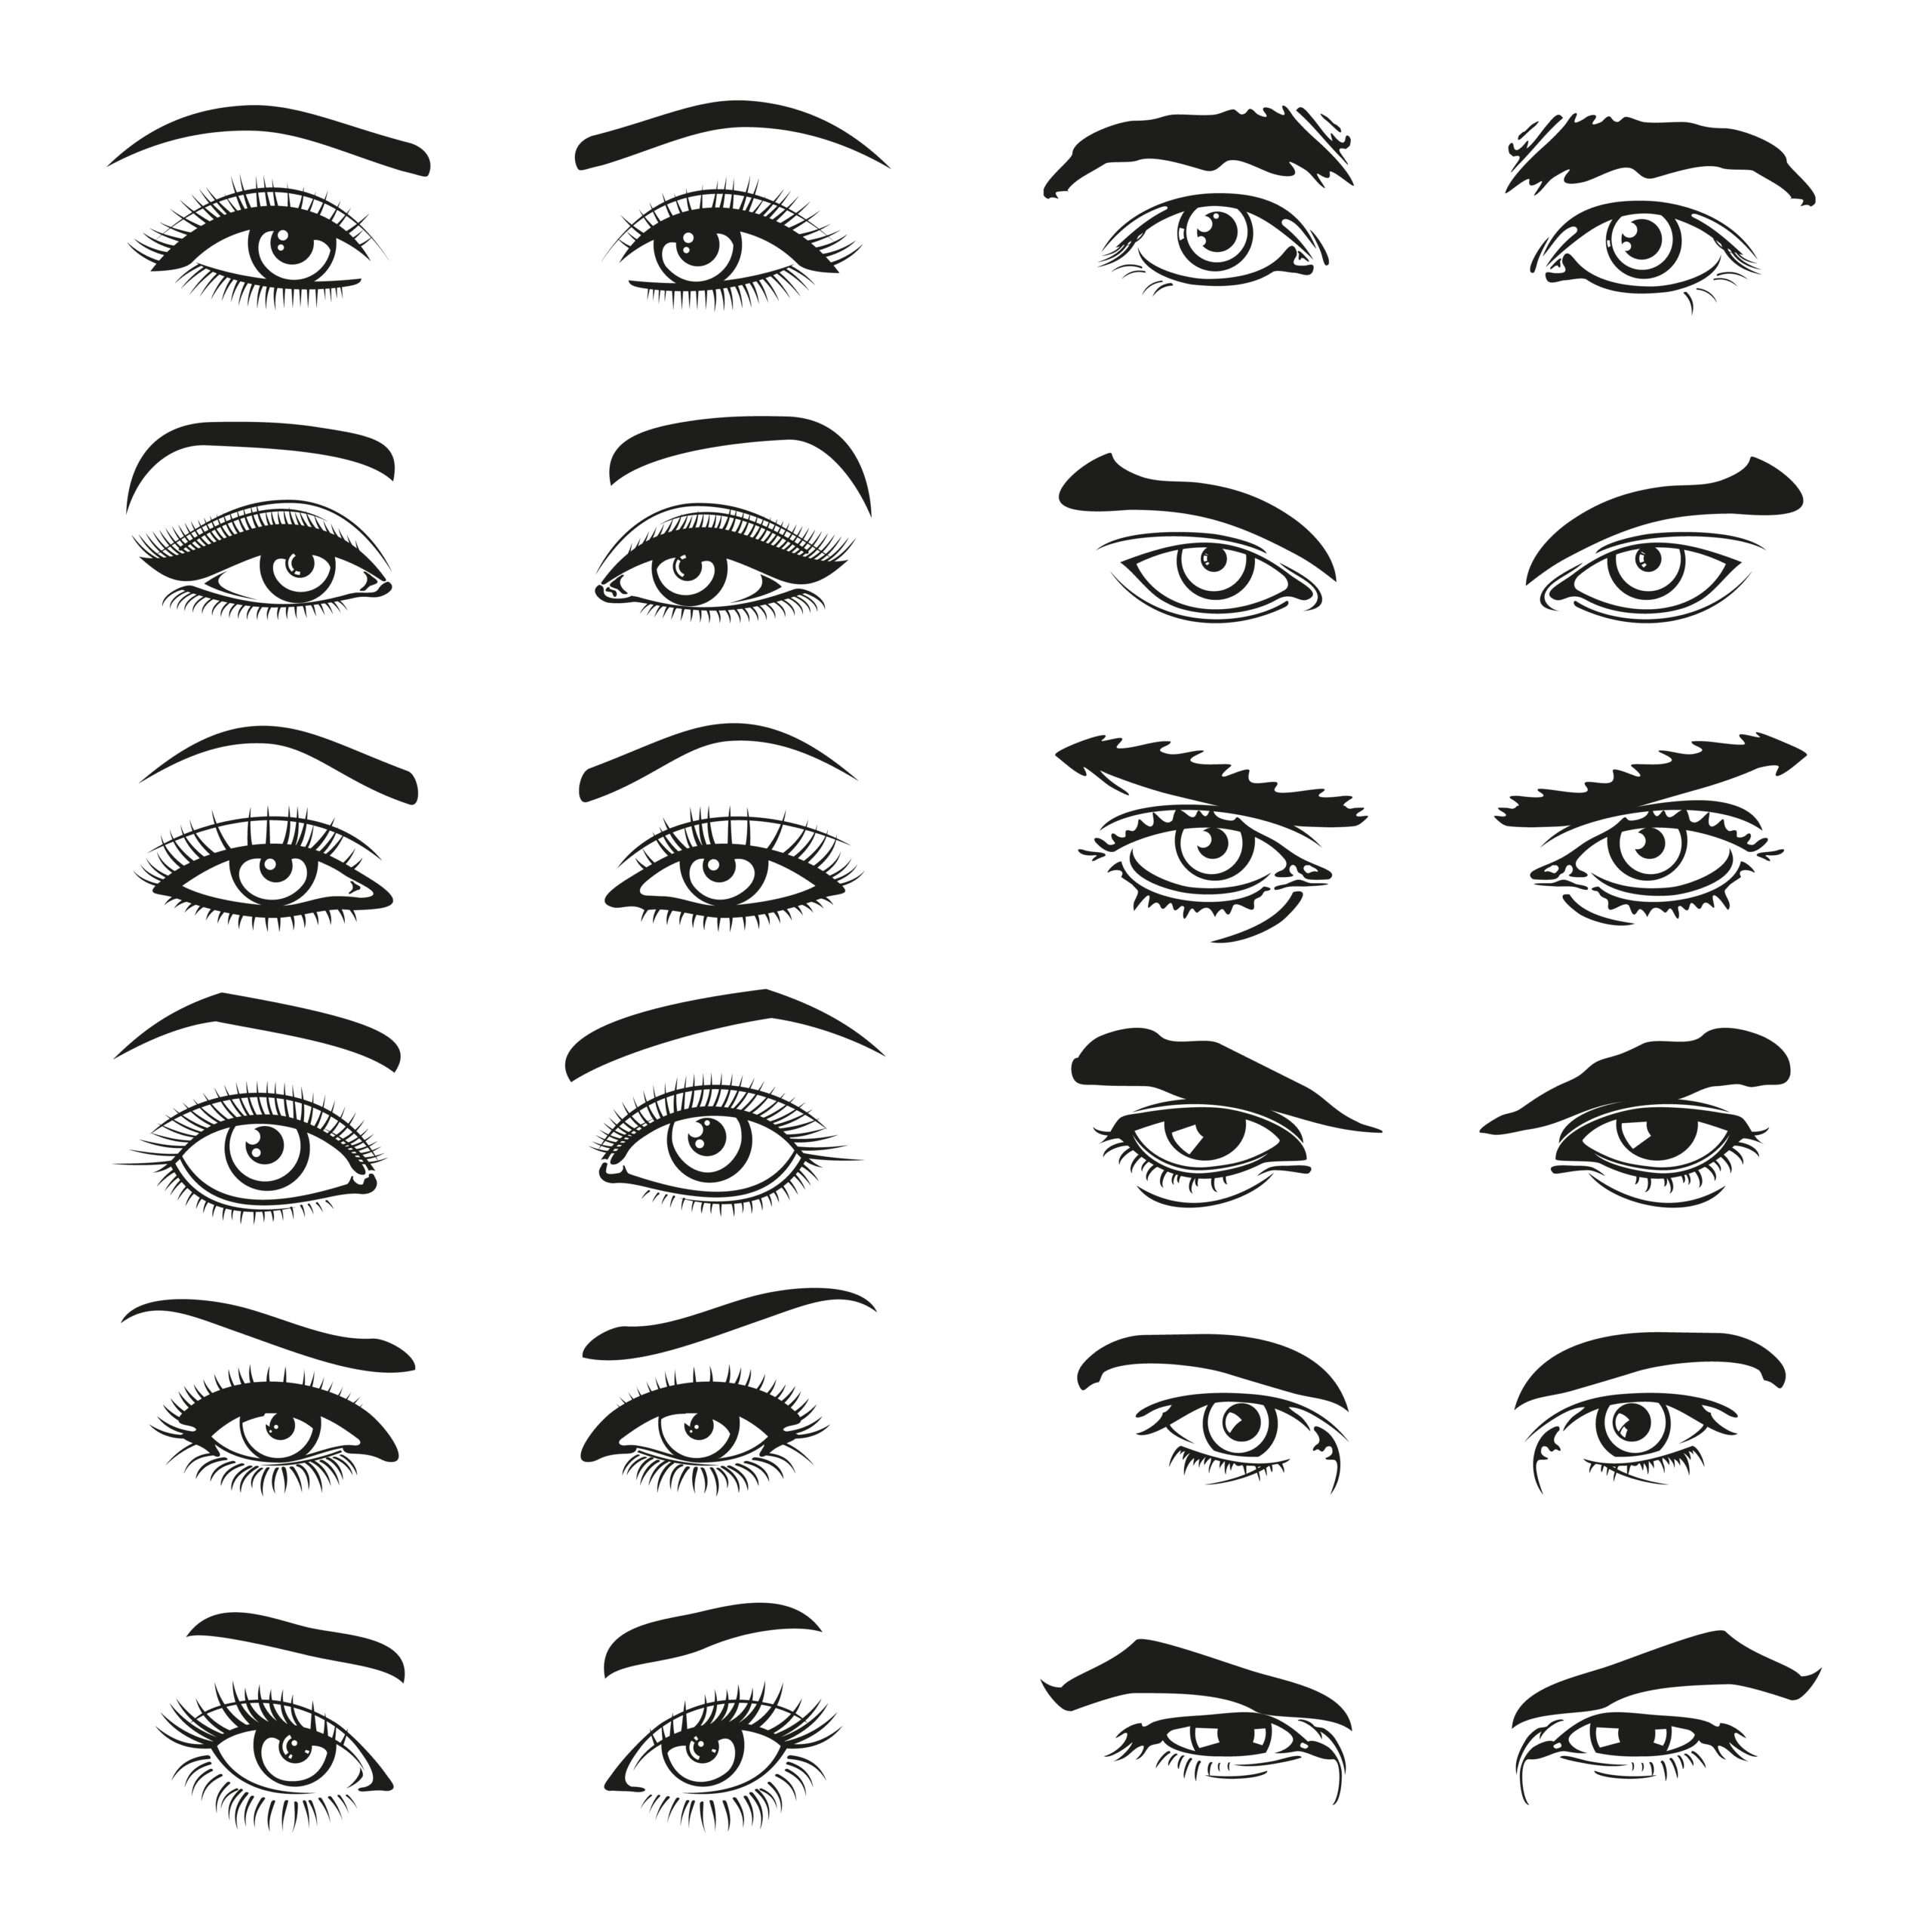 Types of Eyebrow Shapes 